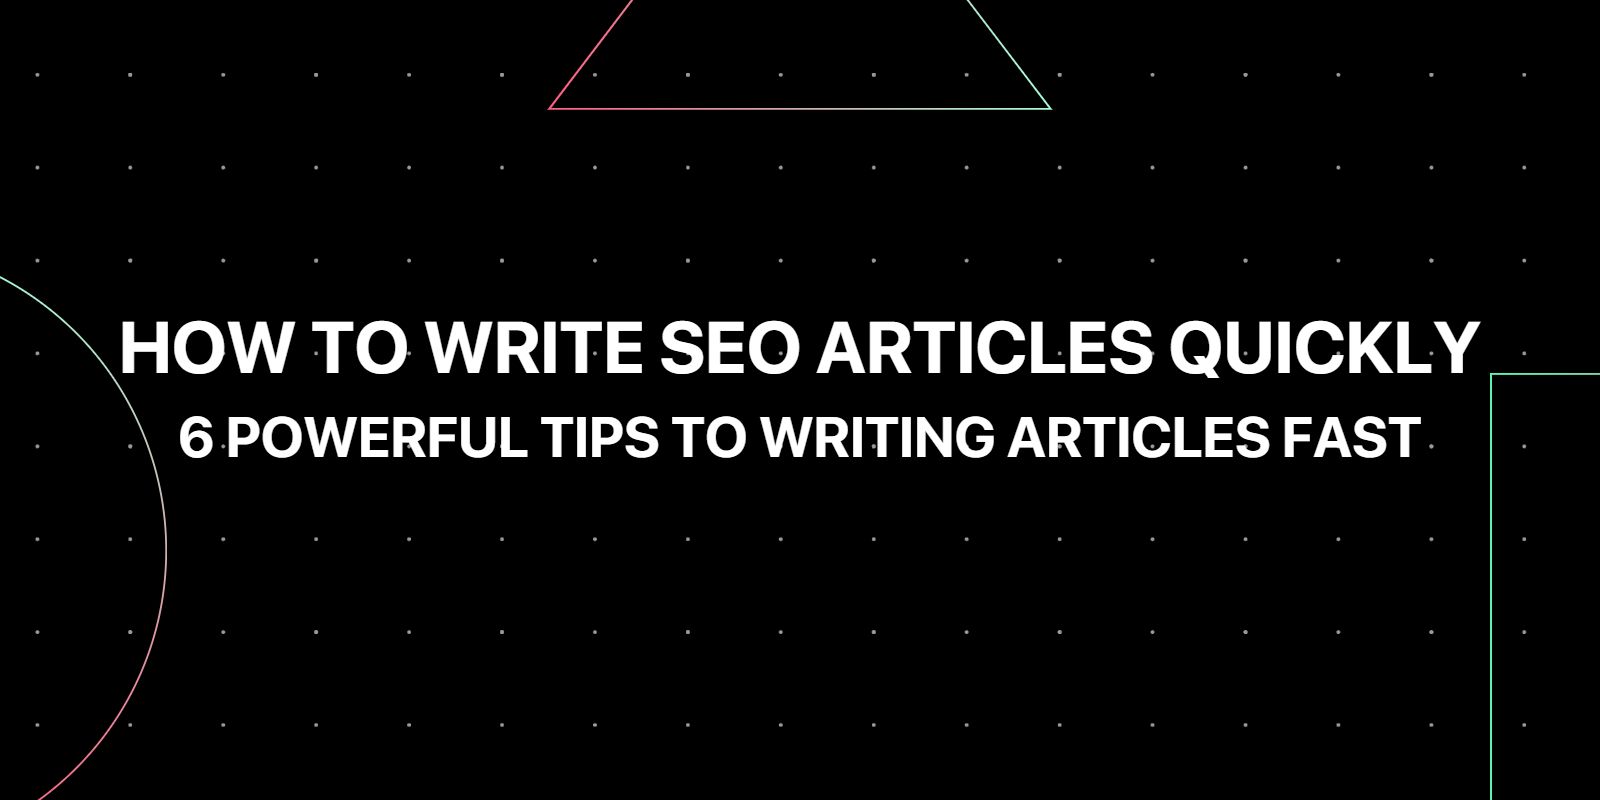 How to Write SEO Articles Quickly - 6 Powerful Tips to Writing Articles Fast